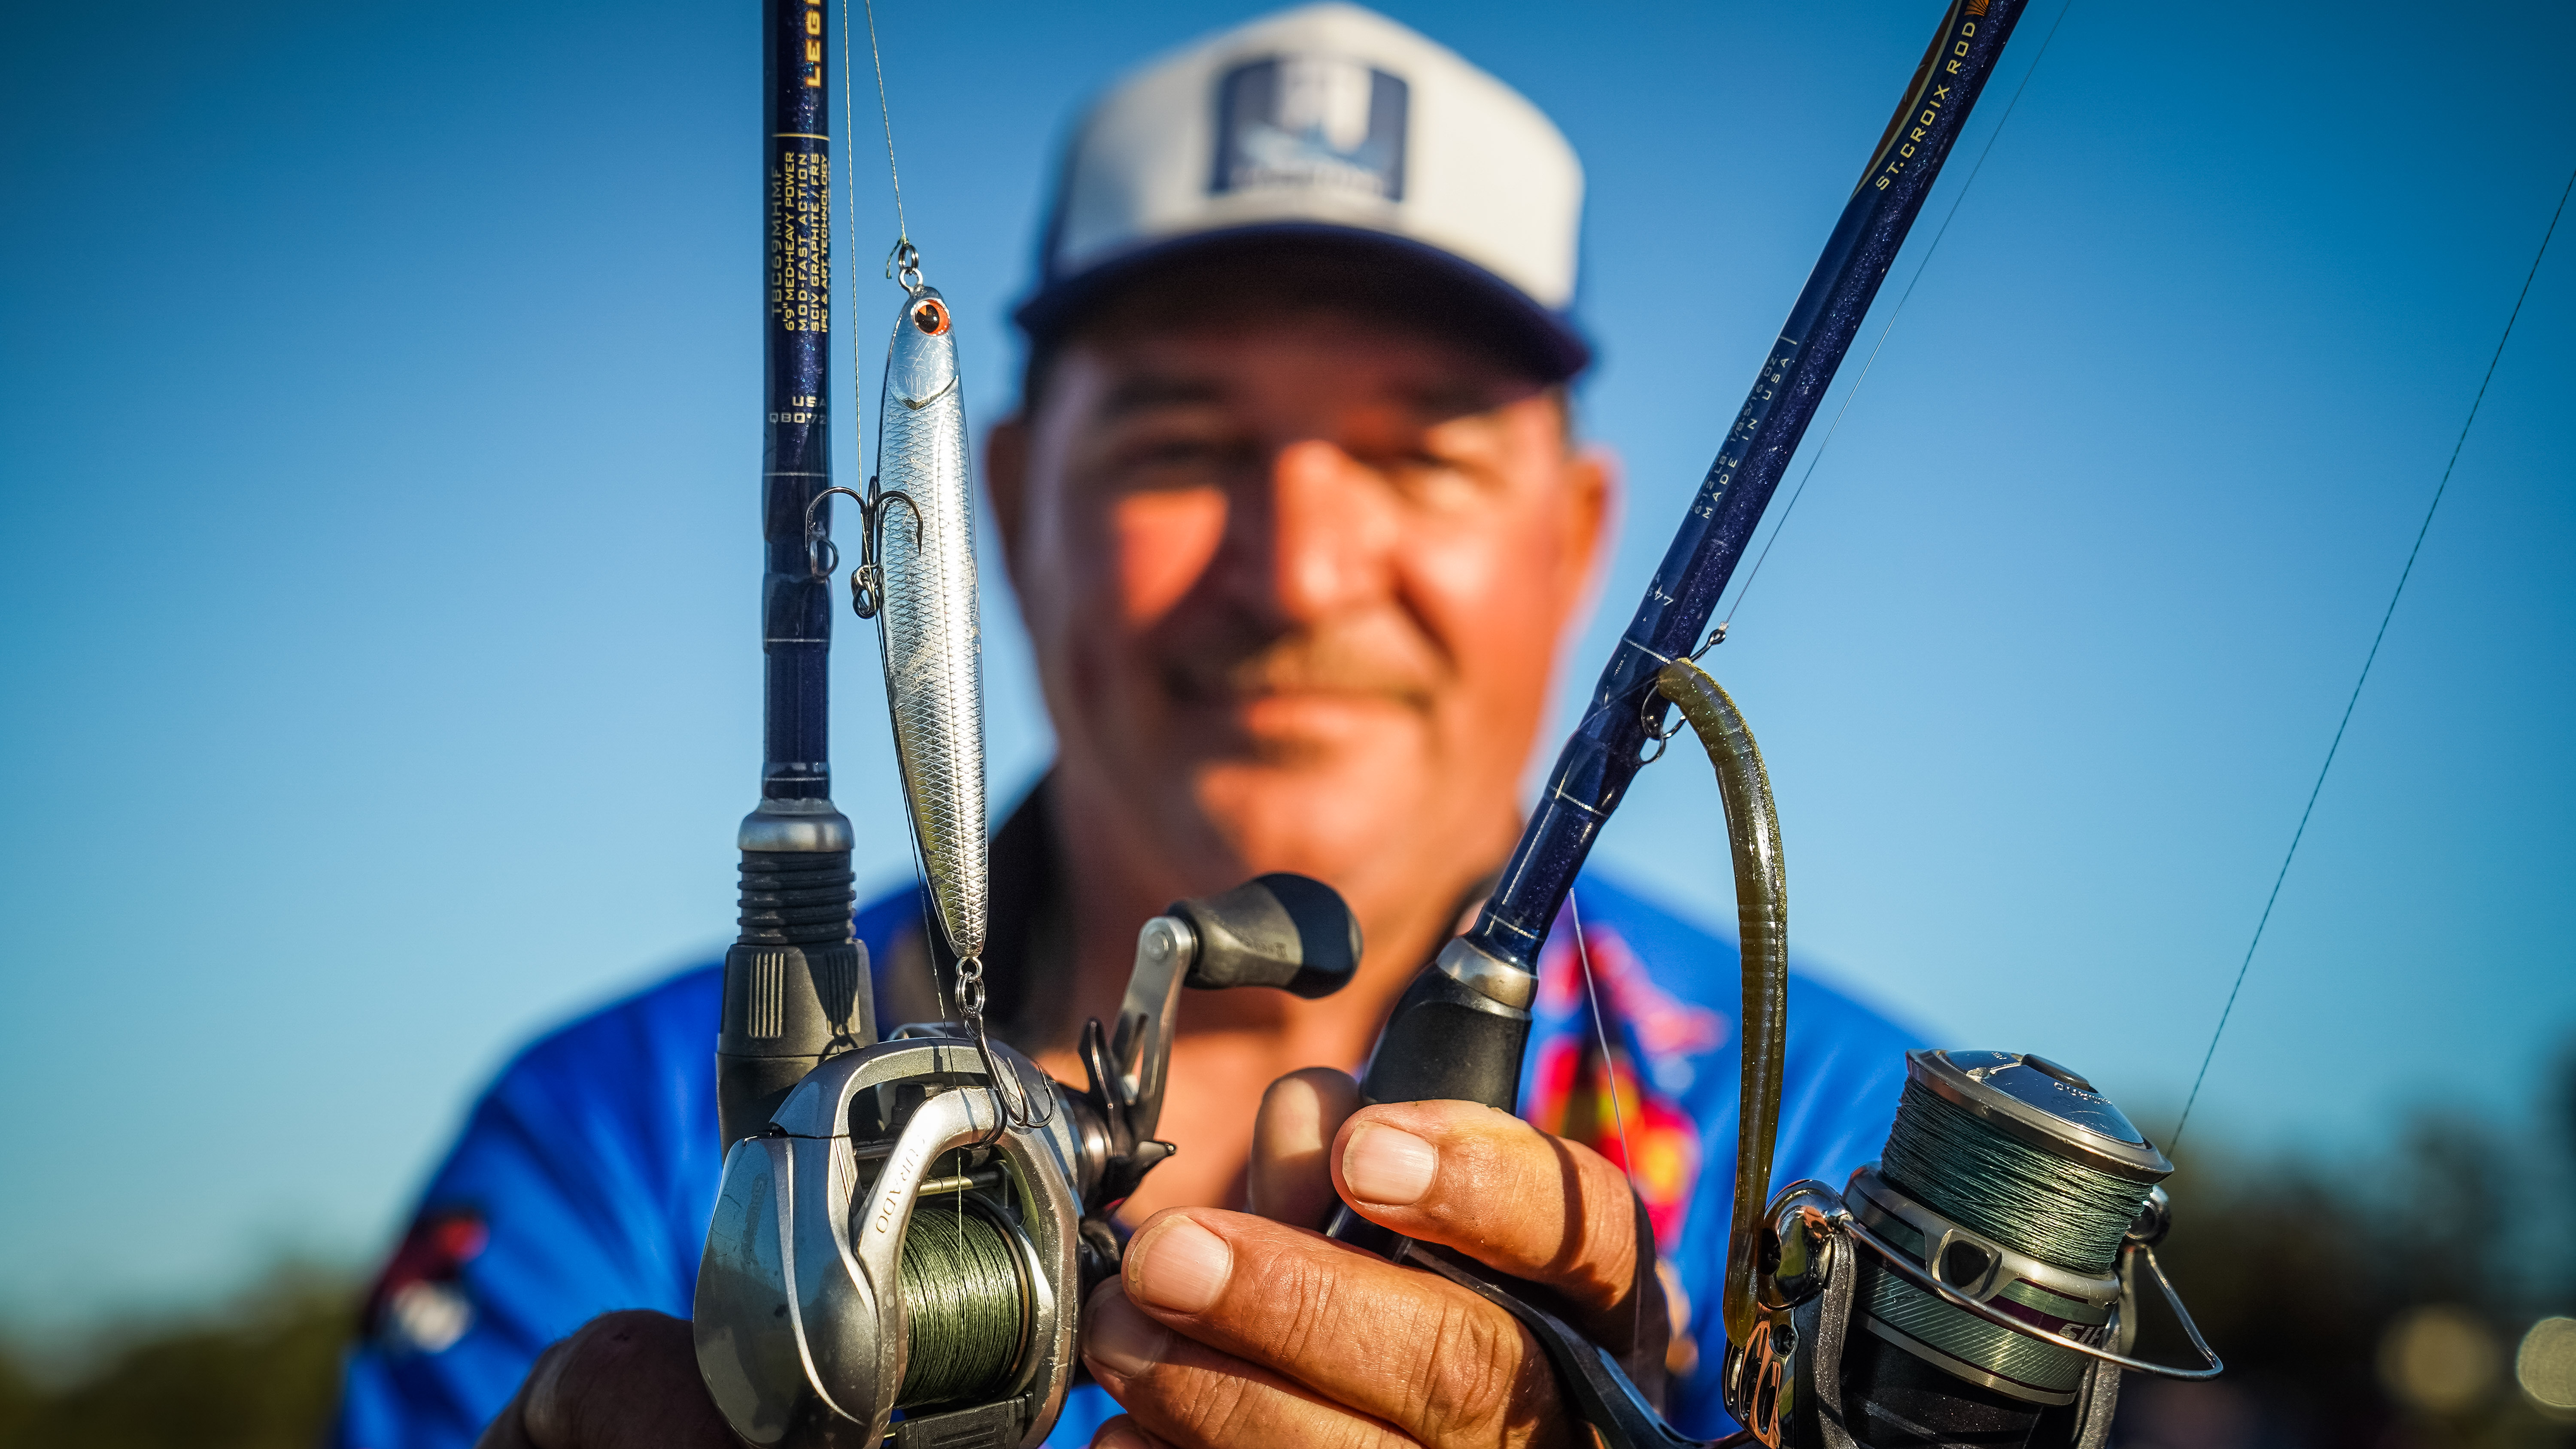 Lost fishing lures find new life thanks to Ed the Diver